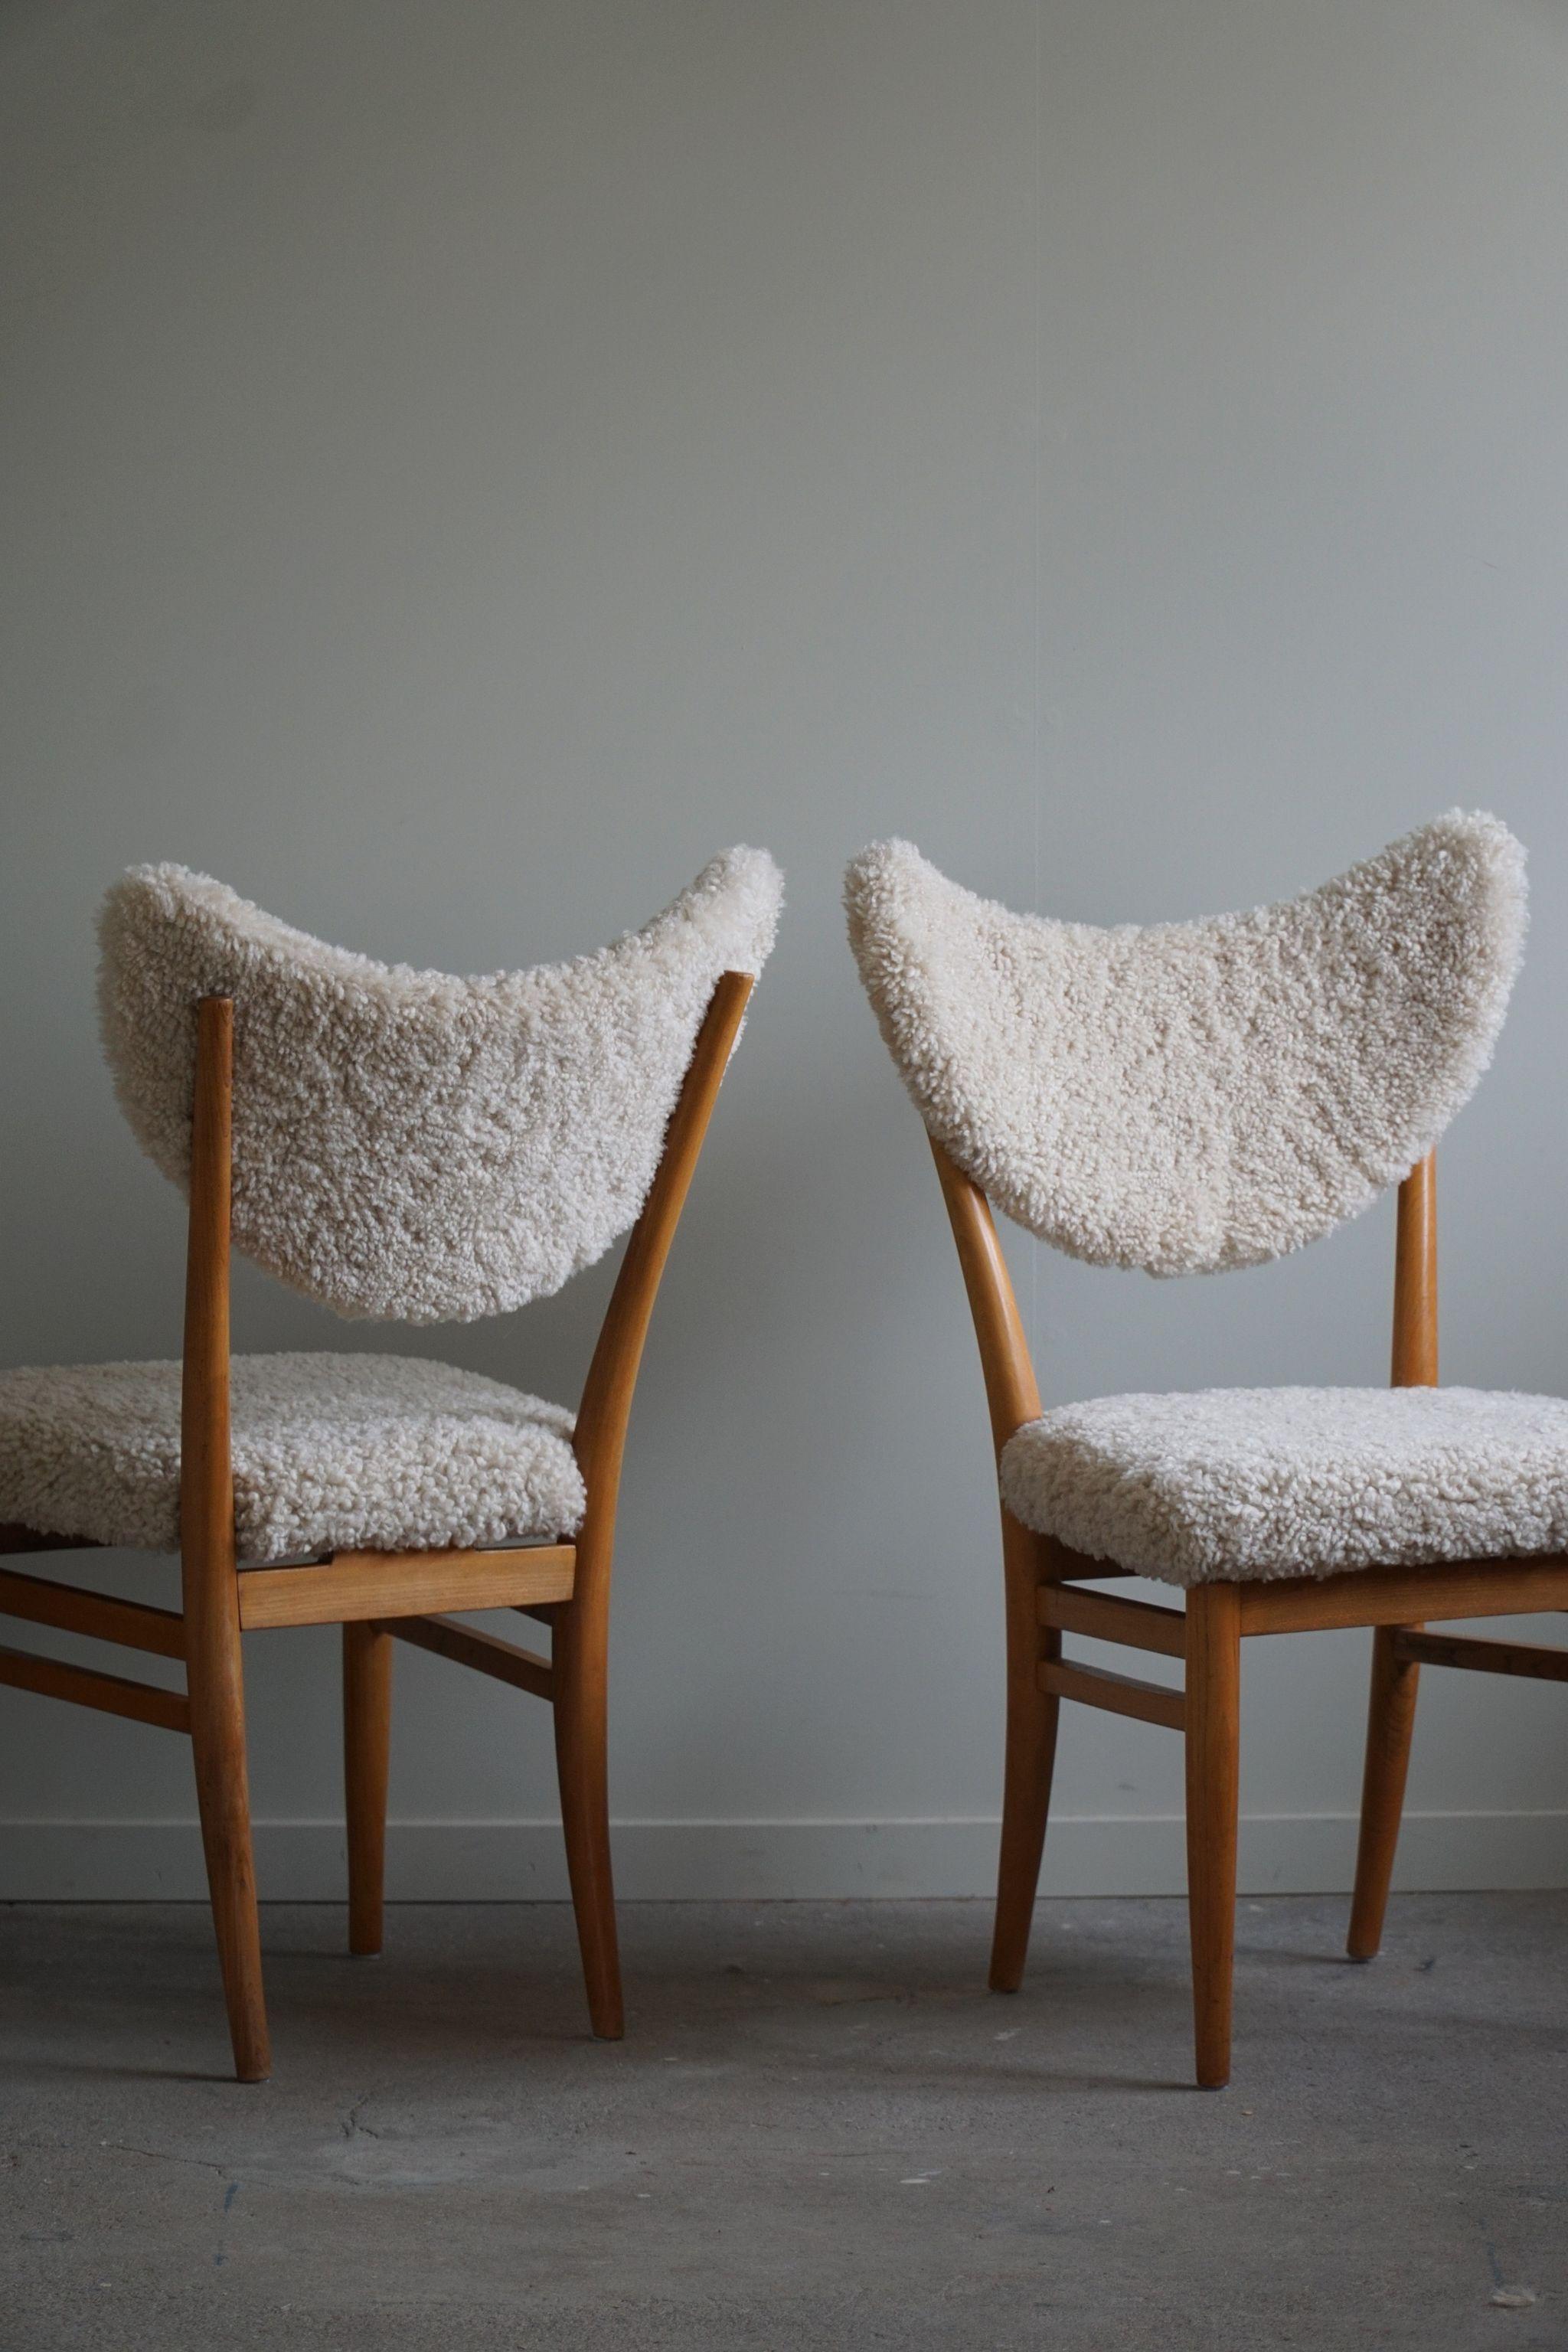 Hvidt & Mølgaard, Set of 4 Chairs in Ash, Reupholstered in Lambswool, 1950s For Sale 13